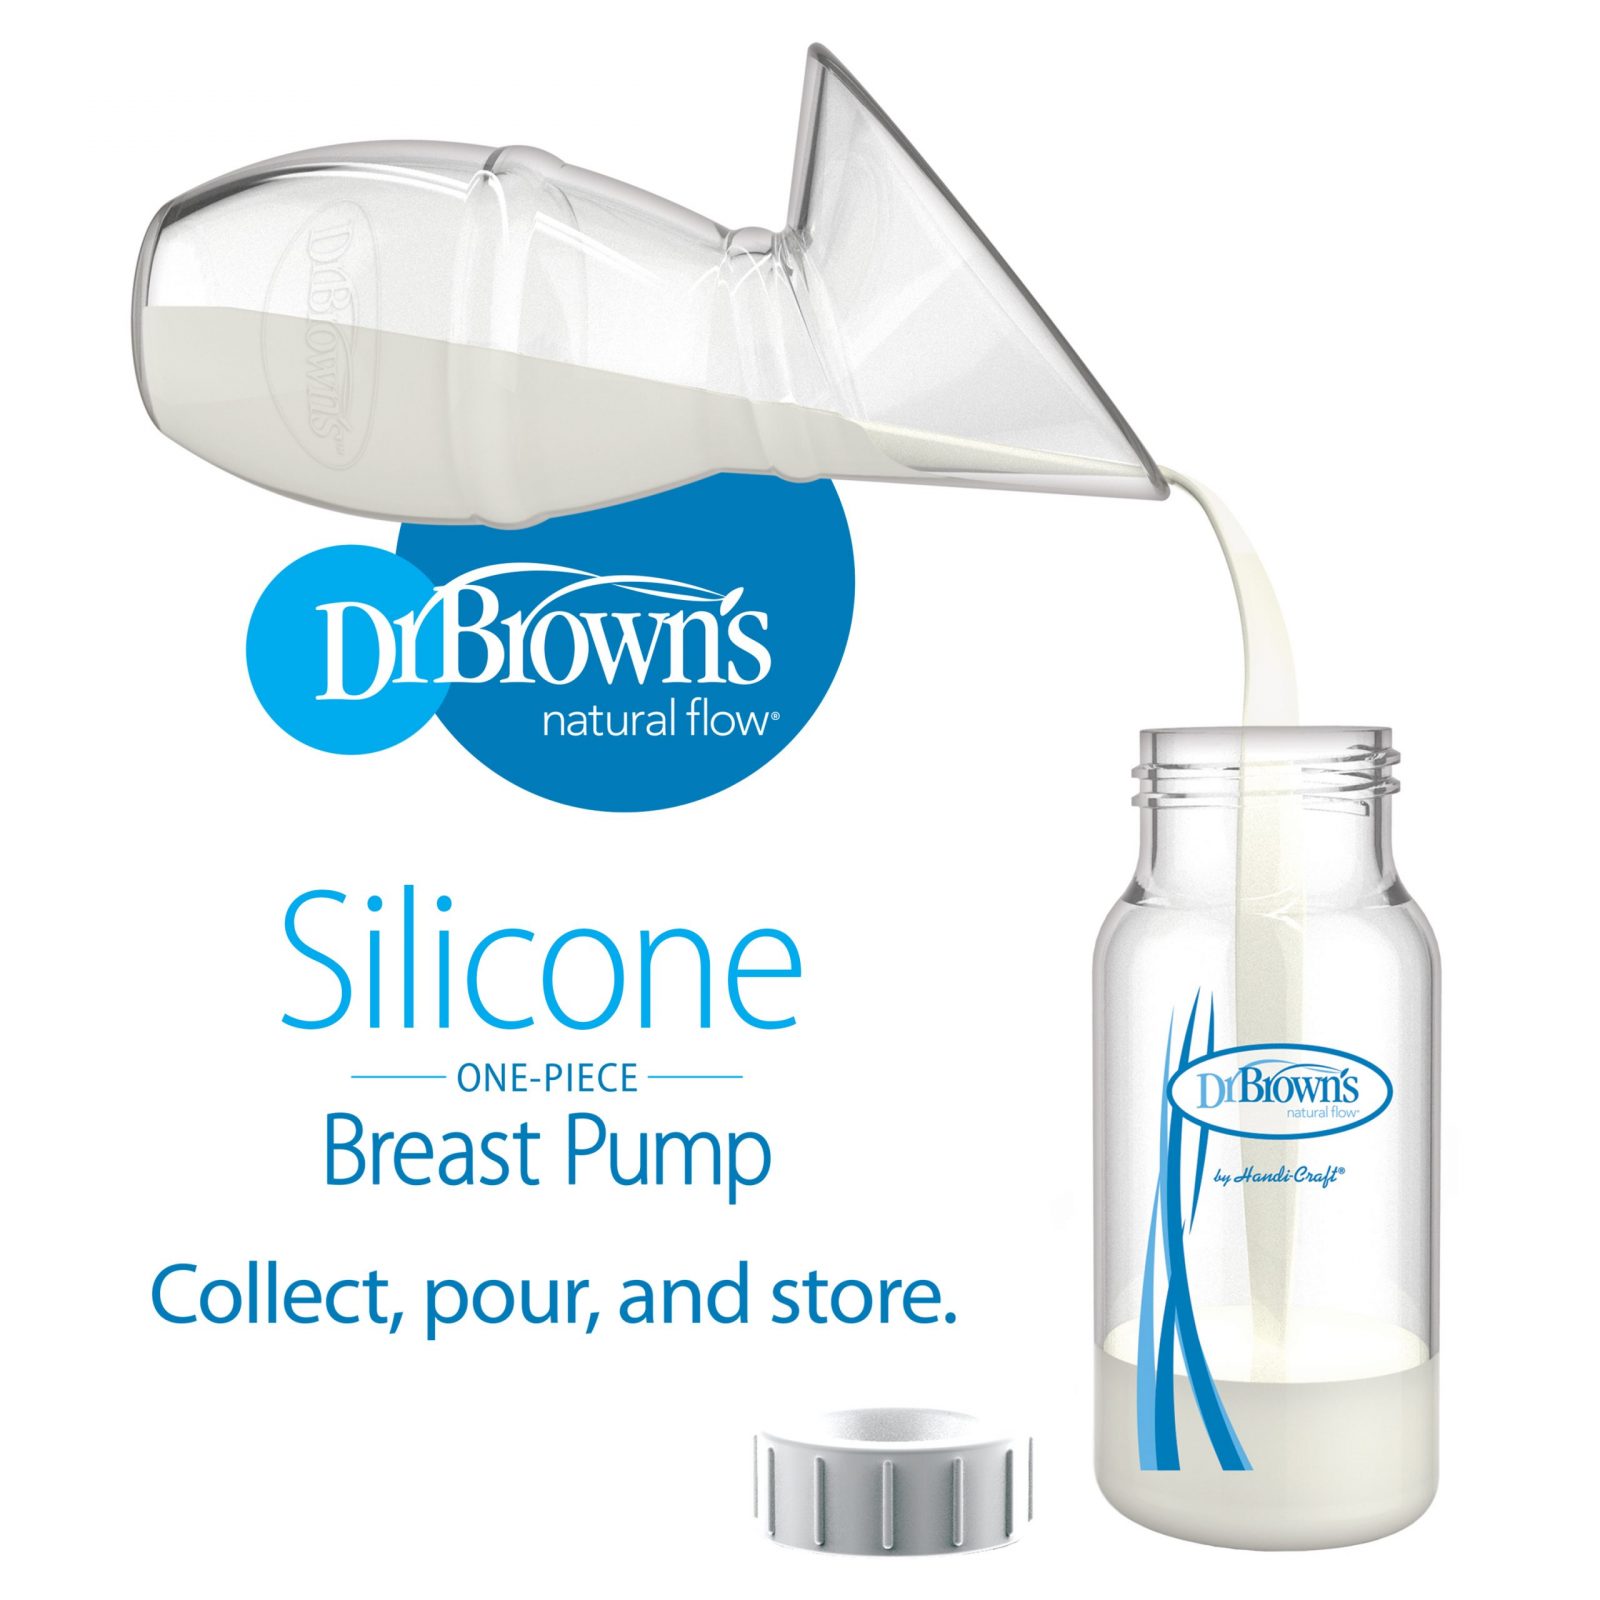 https://www.drbrownsbaby.com/wp-content/uploads/2019/12/BF015_Product_Silicone_One-Piece_Breast_Pump_Collect-Pour-and-Store-scaled.jpg